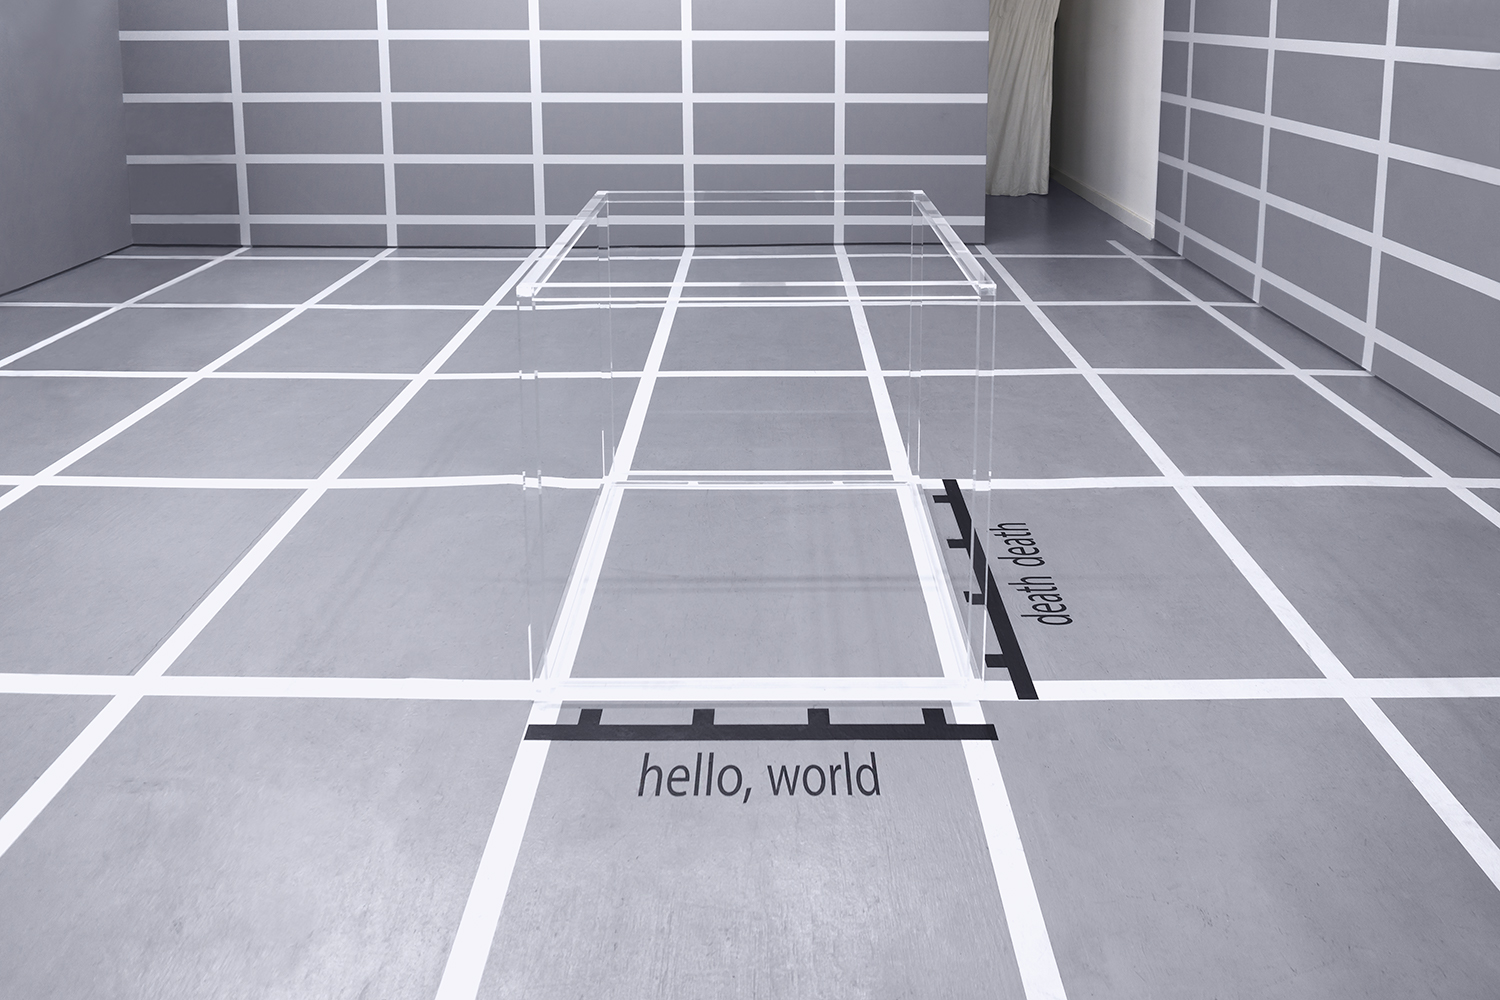 Wireframe acrylic cube and vinyl text on floor at bottom and right reading "hello world" and "death death"